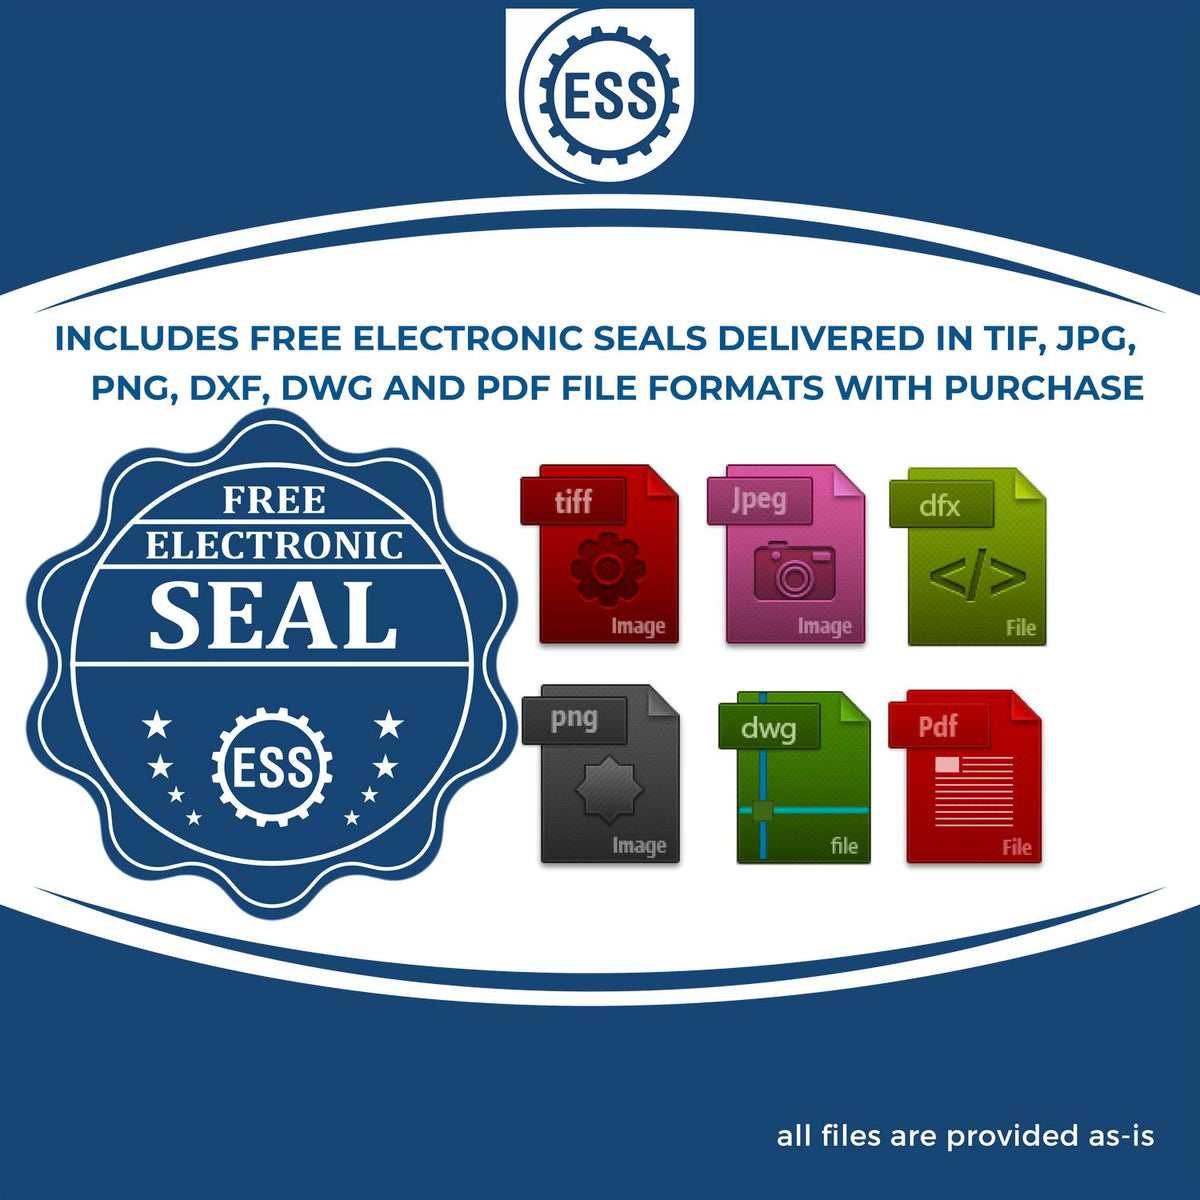 An infographic for the free electronic seal for the Extended Long Reach Colorado Surveyor Embosser illustrating the different file type icons such as DXF, DWG, TIF, JPG and PNG.